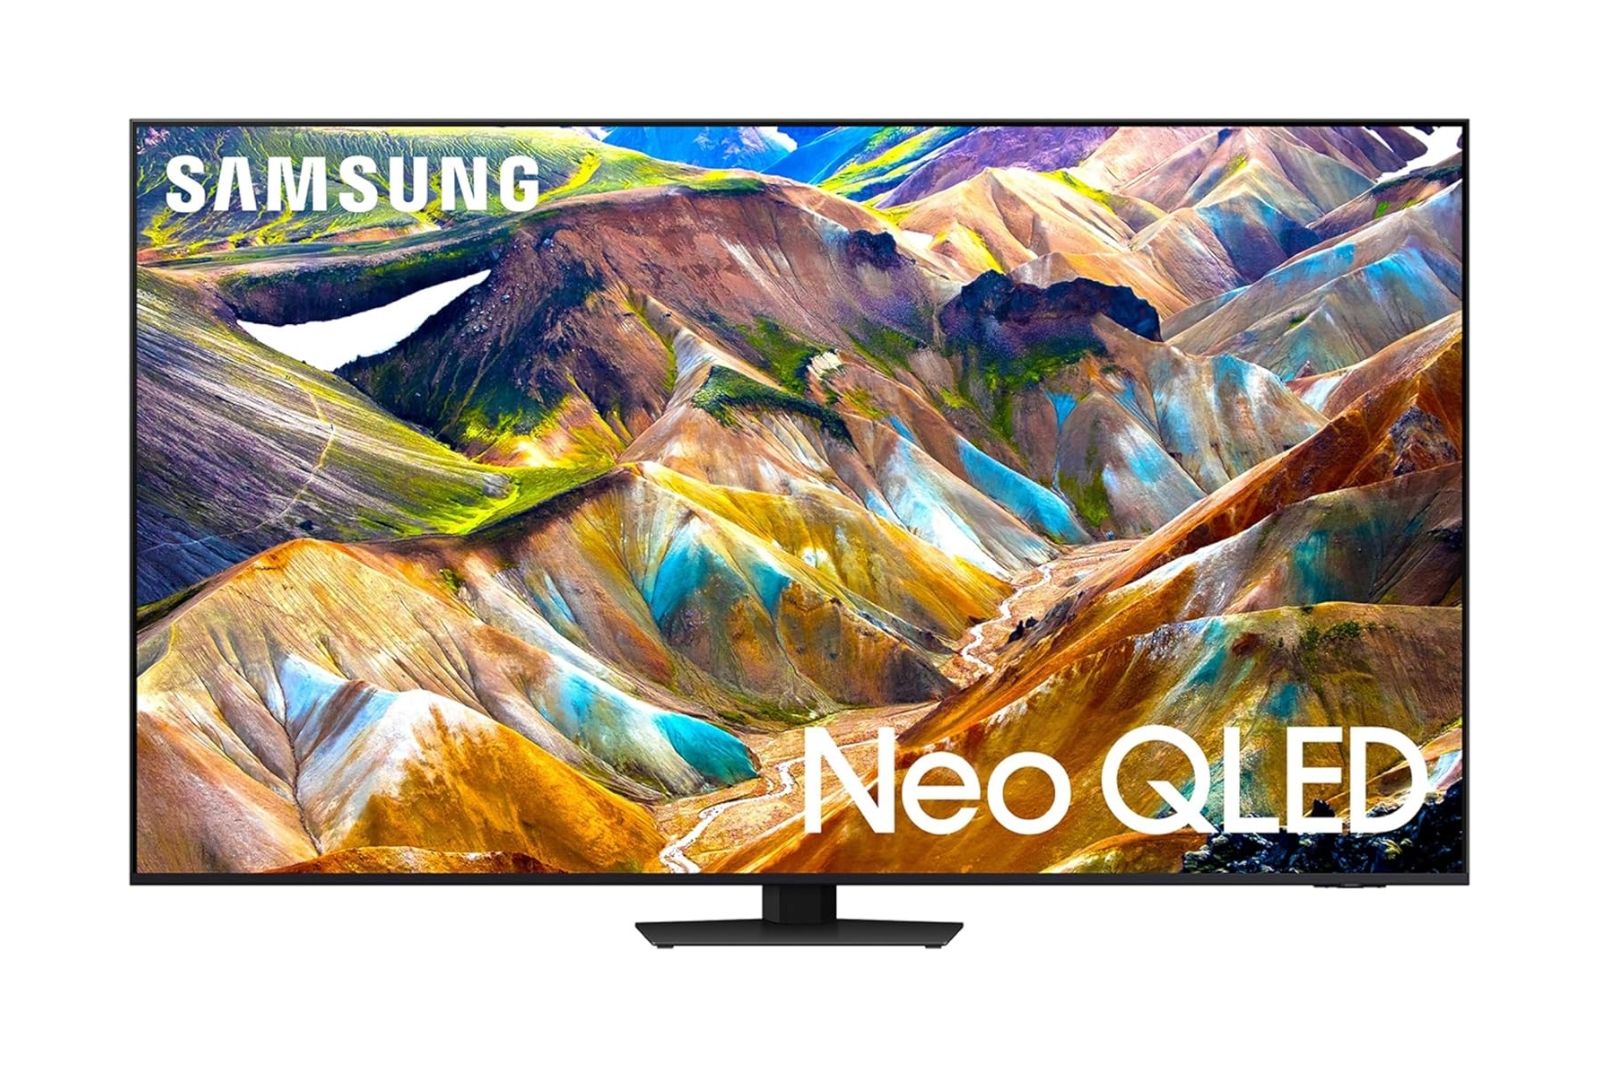 Samsung's cheaper Neo QLED 4K TV with a small rectangular stand and visible bezels.